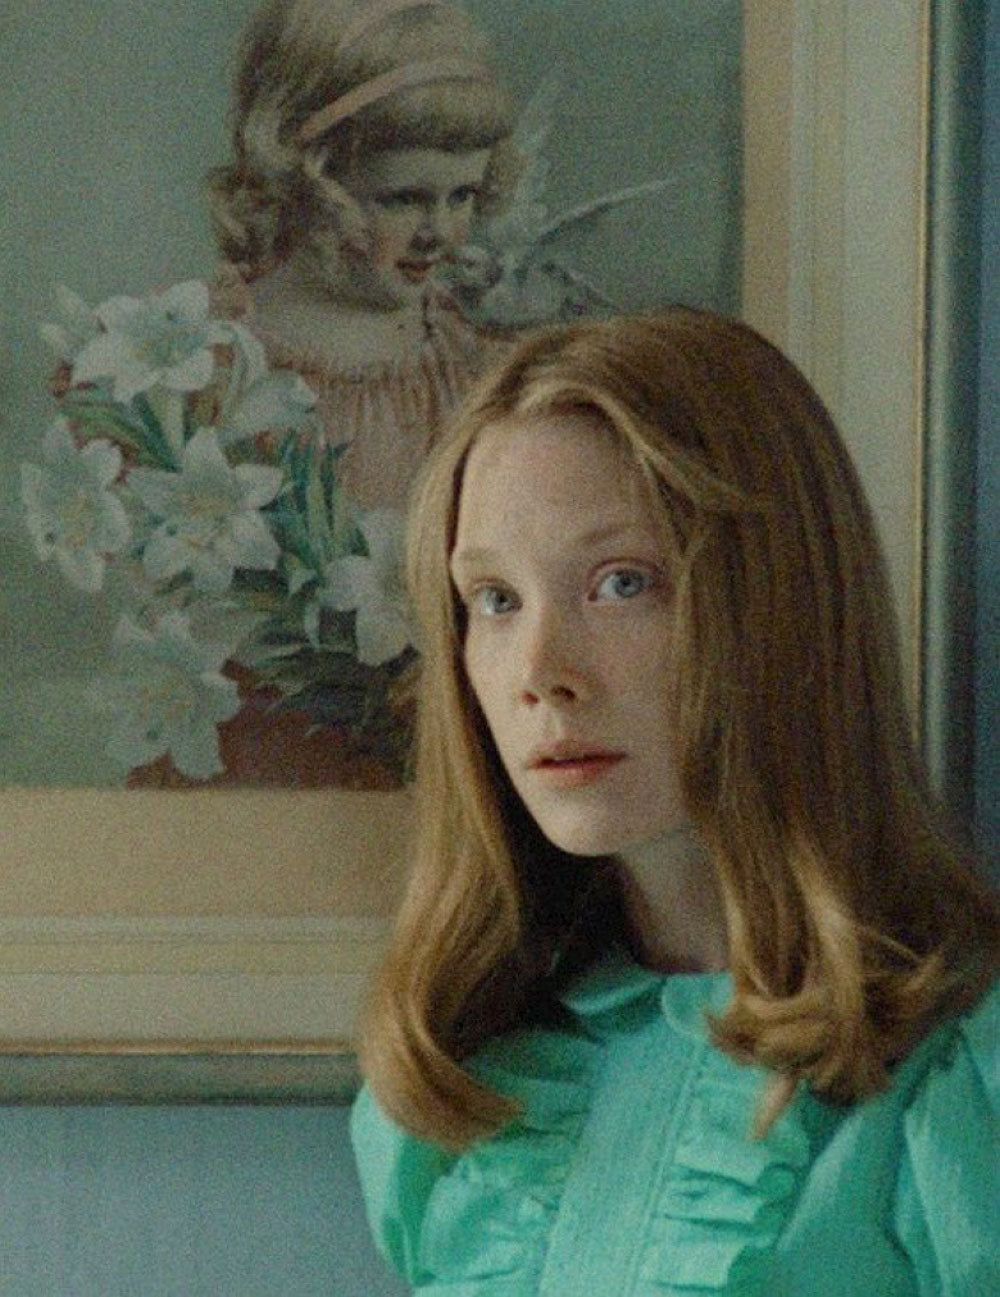 Sissy Spacek with wide lovely eyes in Badlands – The Vampire's Wife